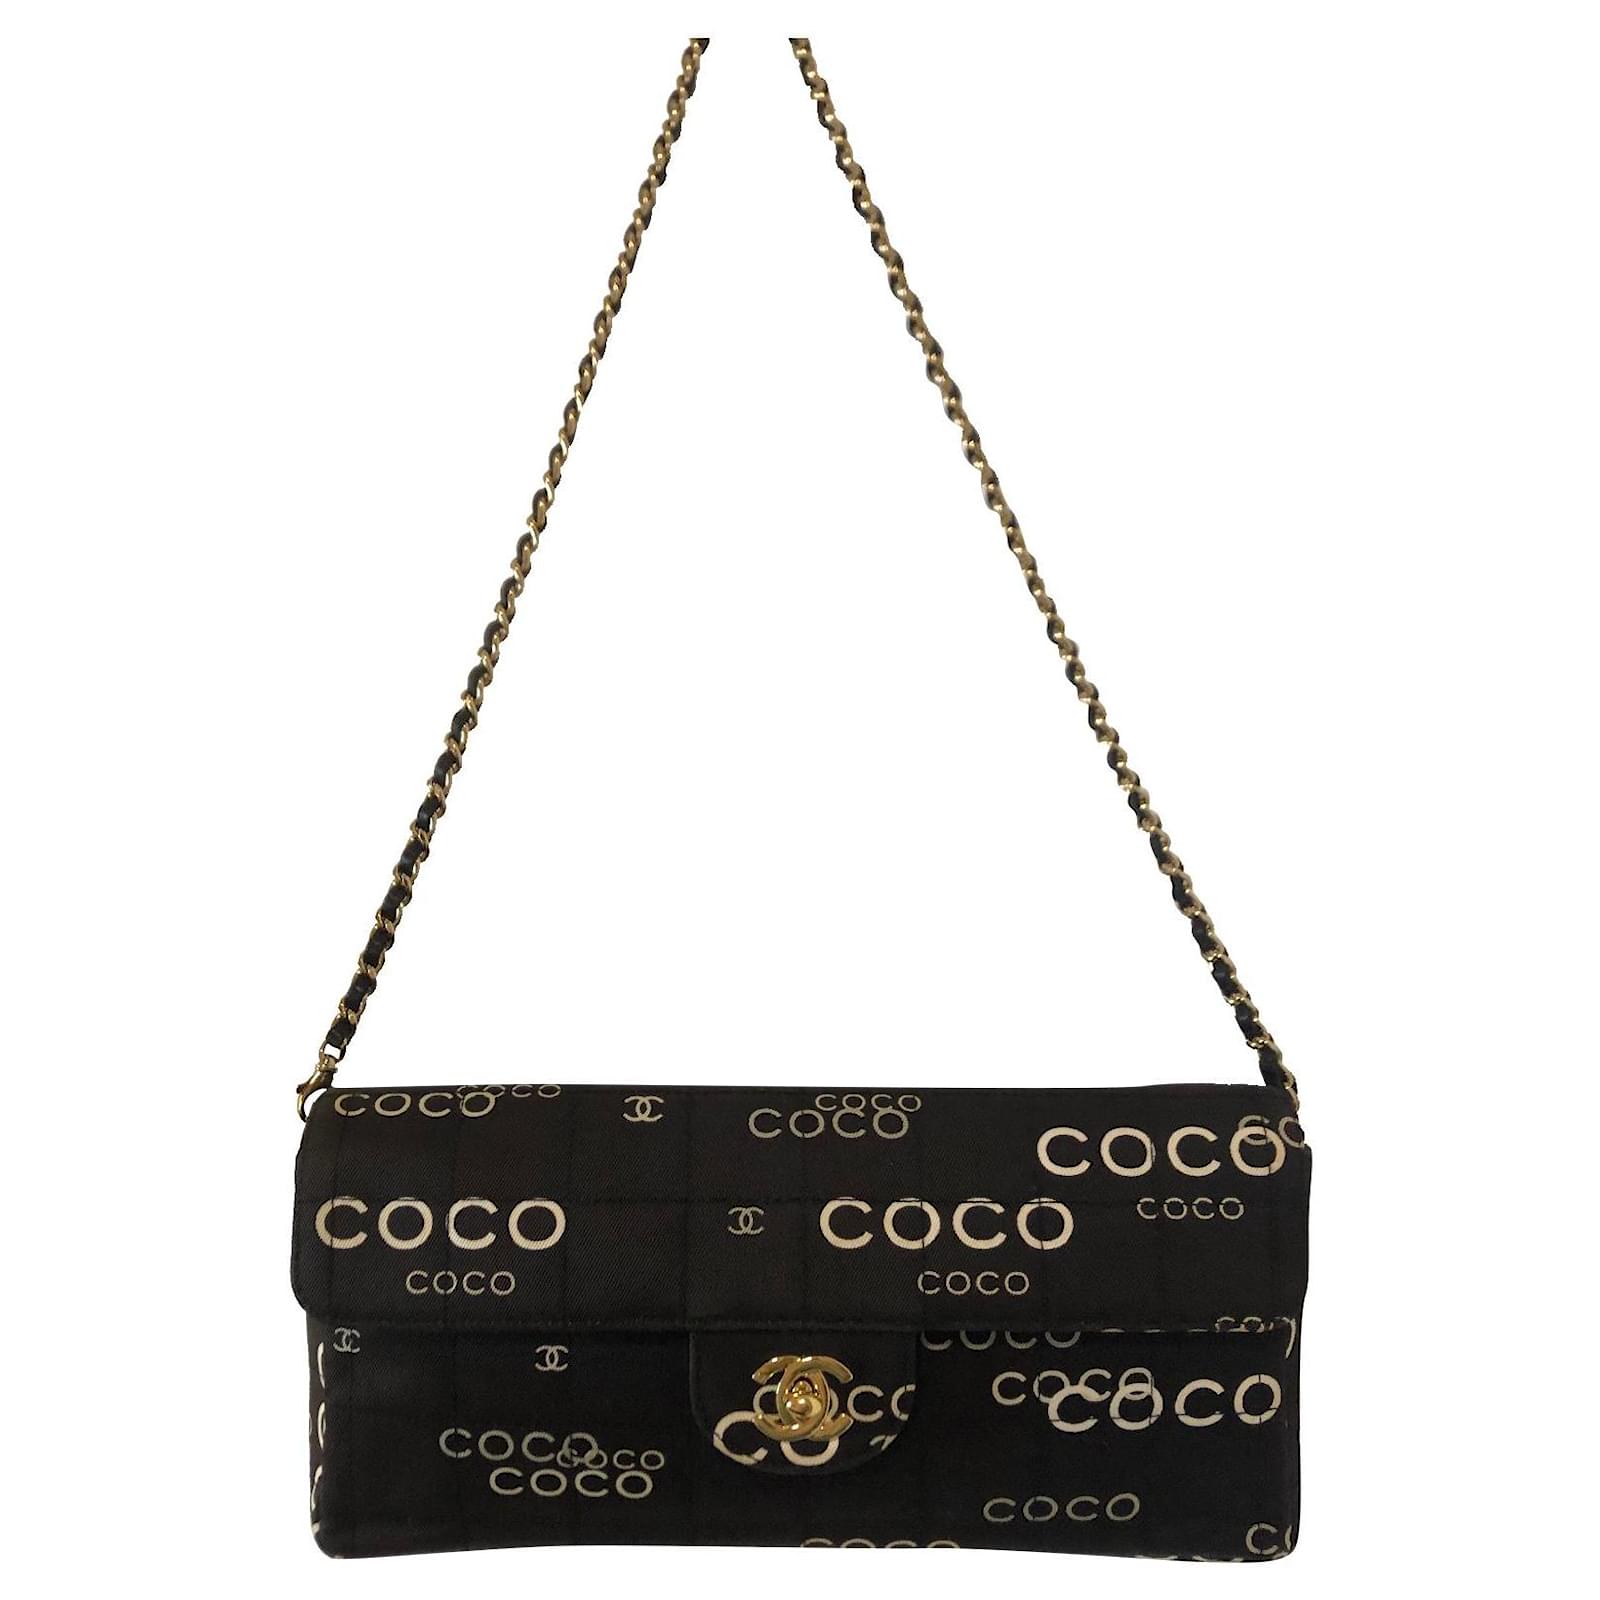 chanel bag with letters